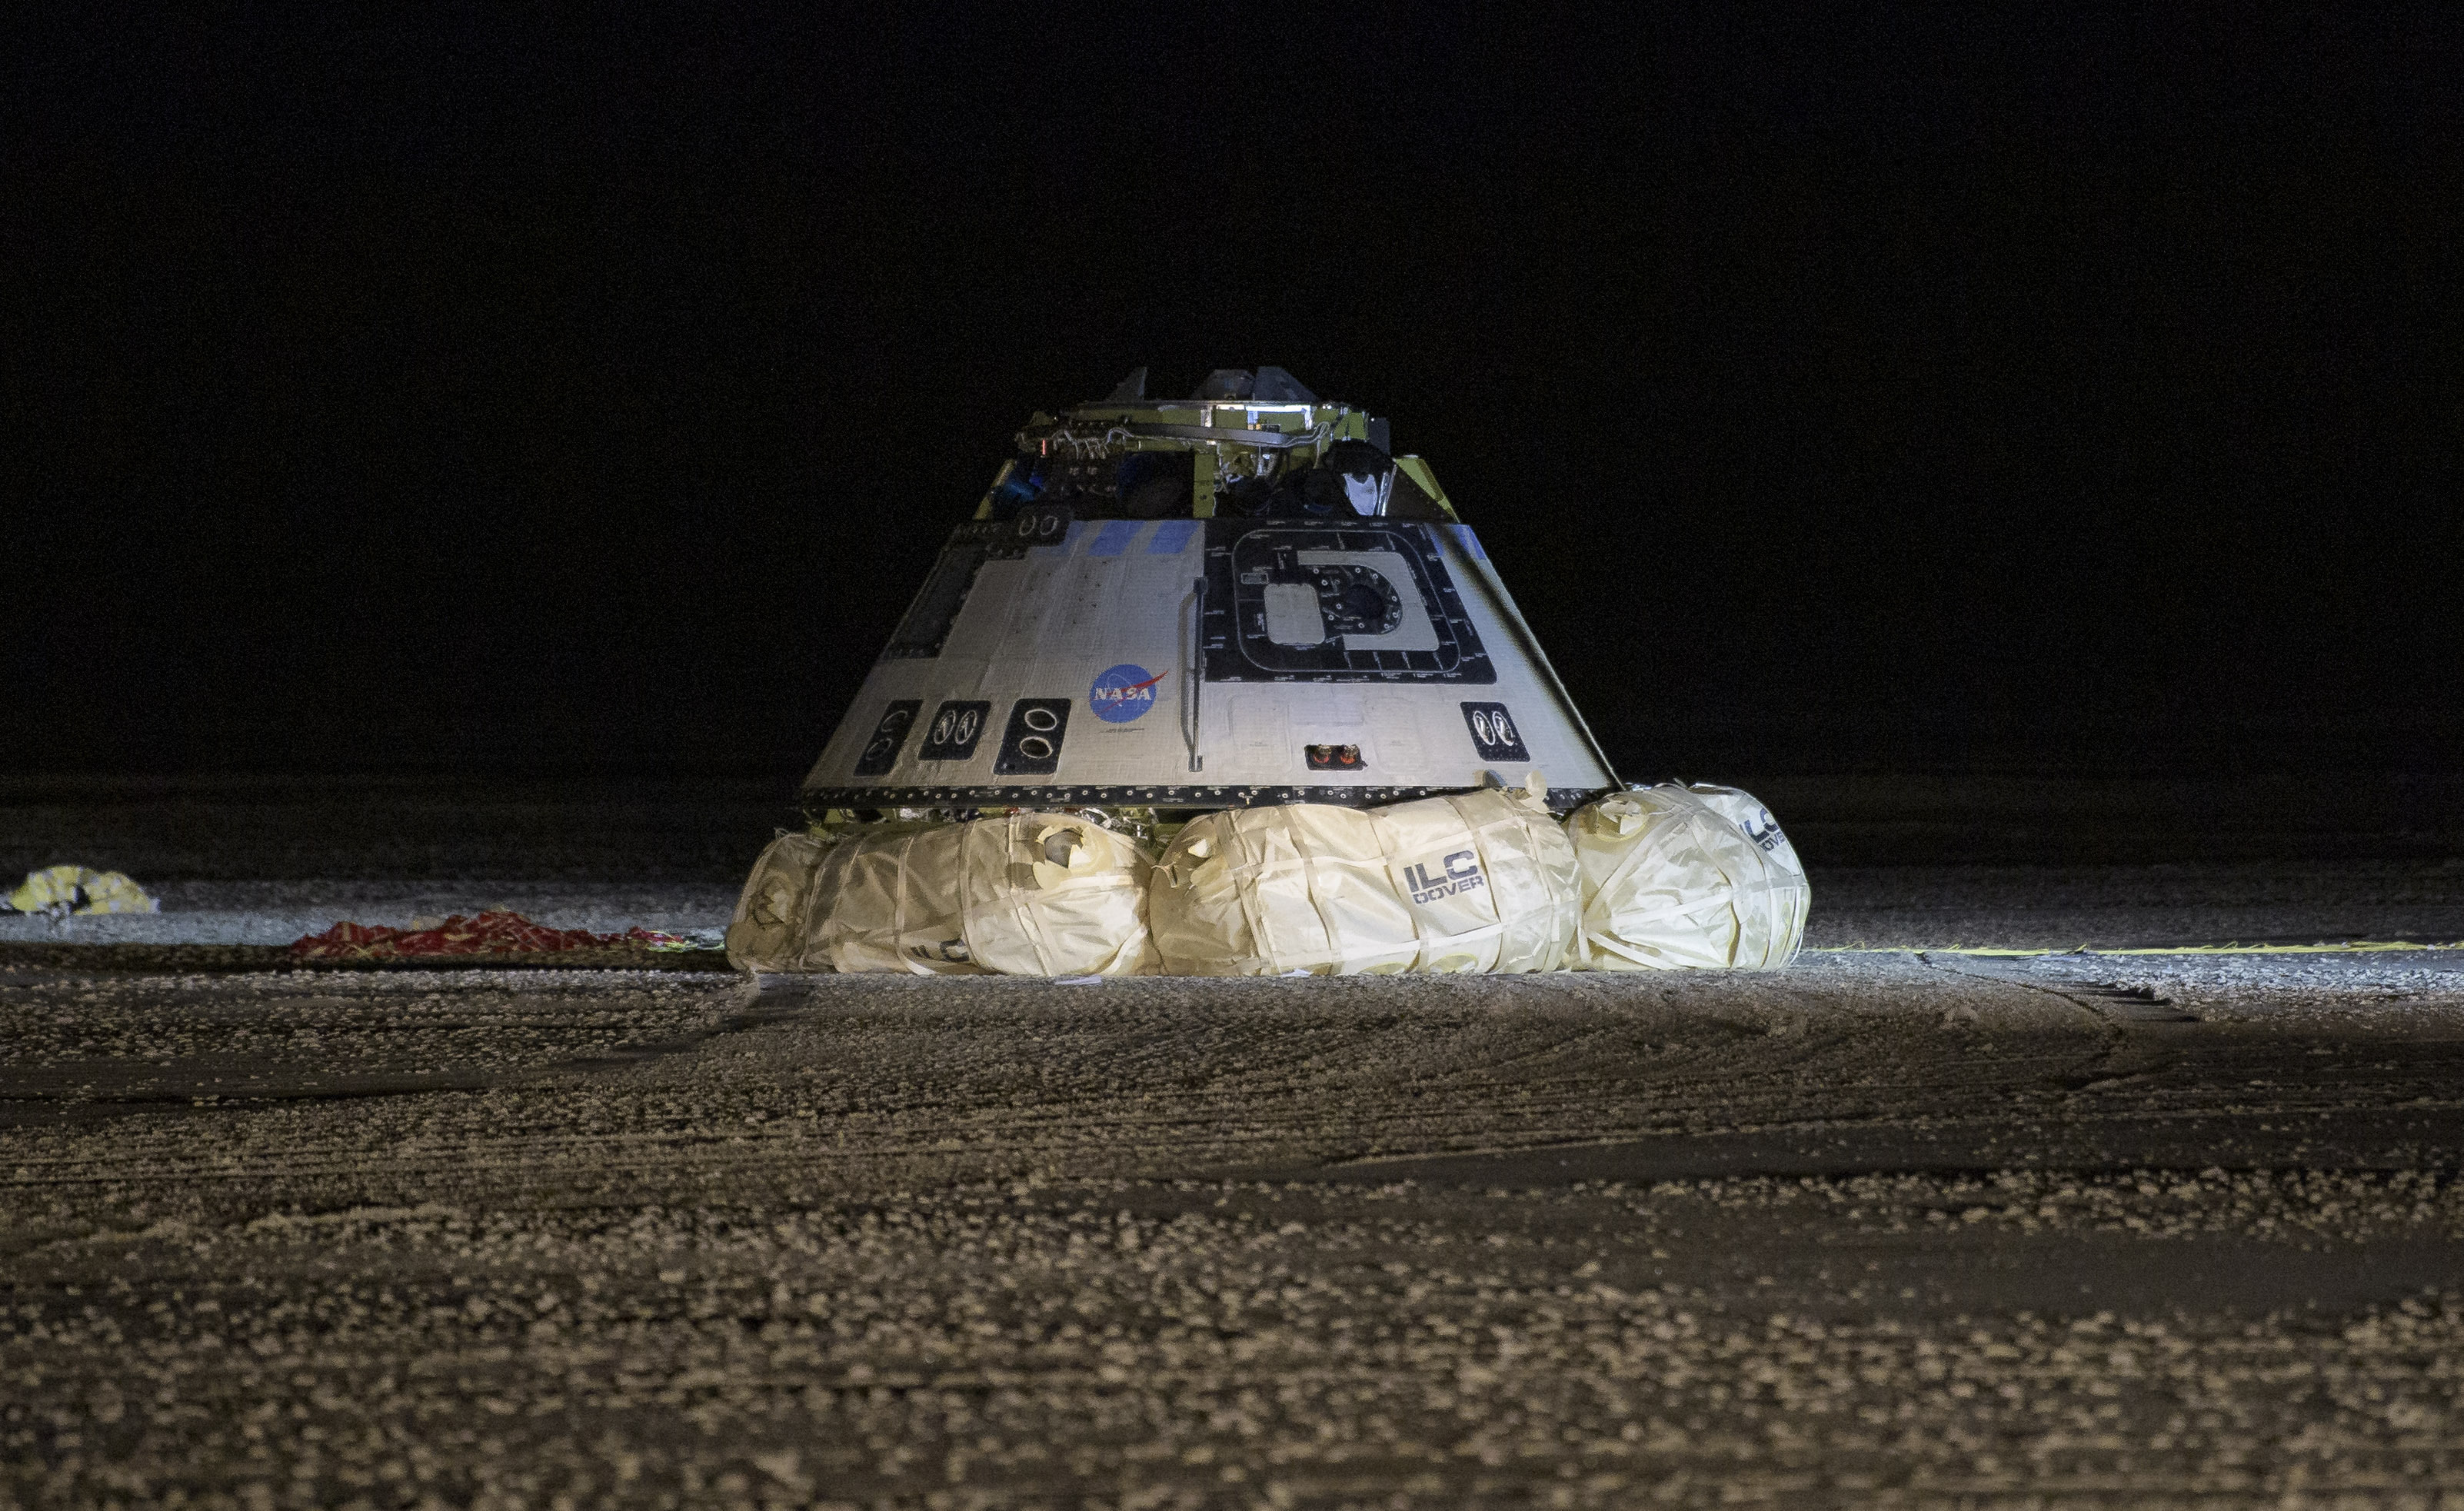 Boeing, NASA, and U.S. Army personnel work around the Boeing Starliner spacecraft shortly after it landed in White Sands, New Mexico, on Sunday.